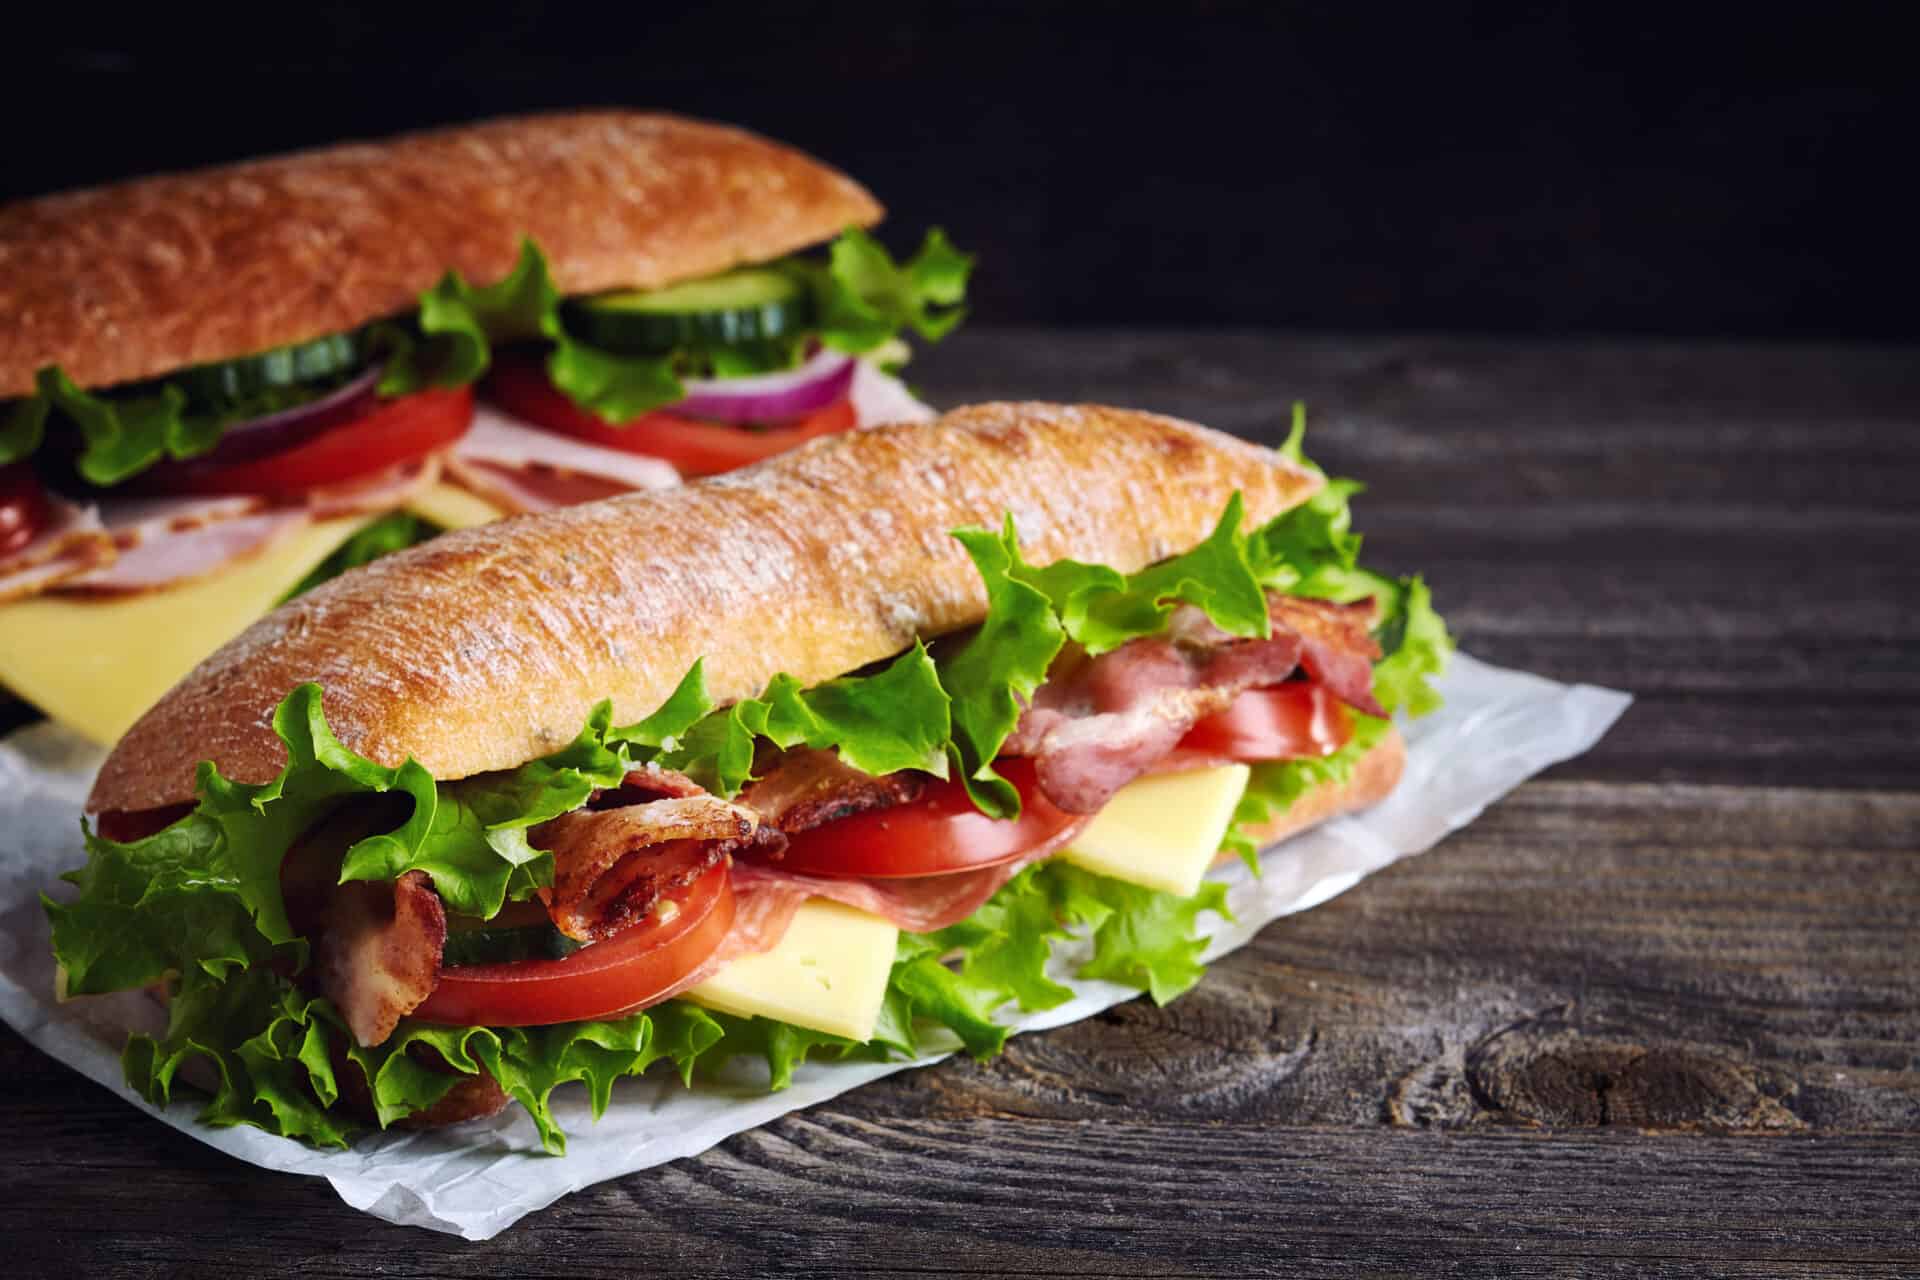 Two fresh submarine sandwiches with ham, cheese, bacon, tomatoes, lettuce, cucumbers and onions on dark wooden background. An example of school lunches at Hazel Grove High School Canteen for illustrative purposes.